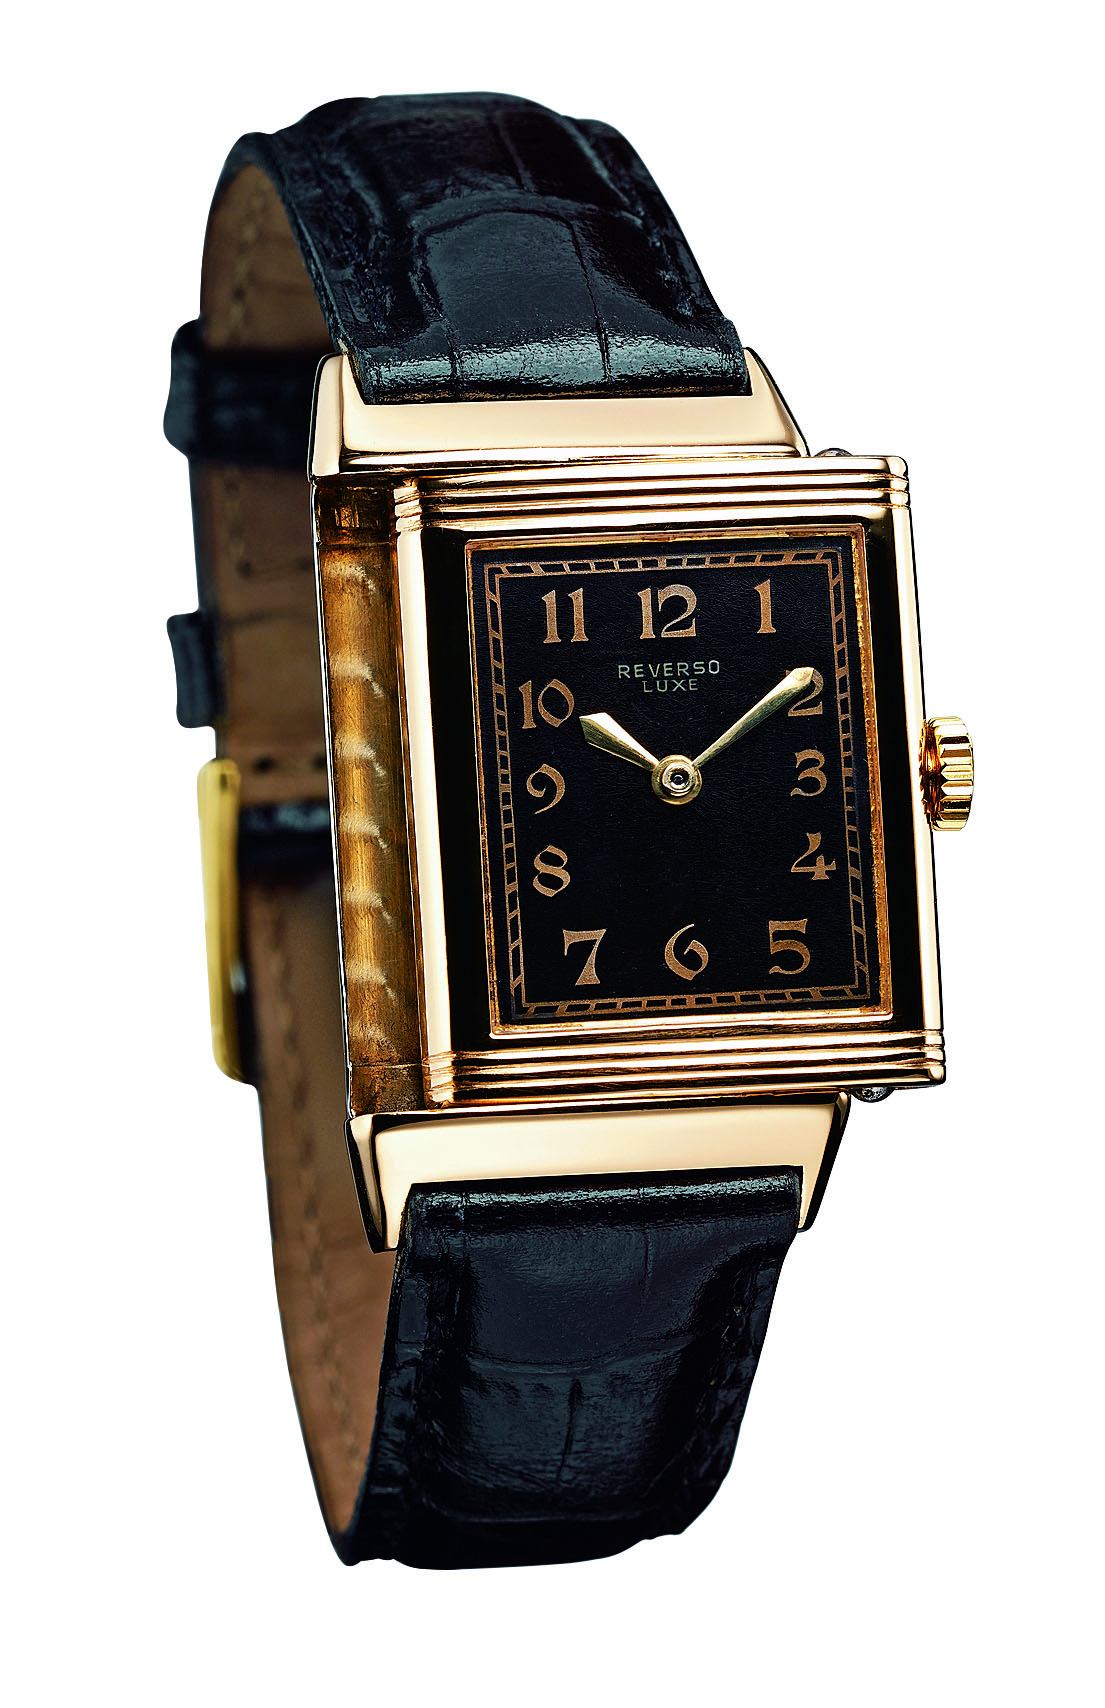 The Art Deco style also influenced the design of wristwatches. With a rectangular case engraved with parallel lines at its upper and lower margins, the Reverso was a child of its era. LeCoultre was one of its producers.